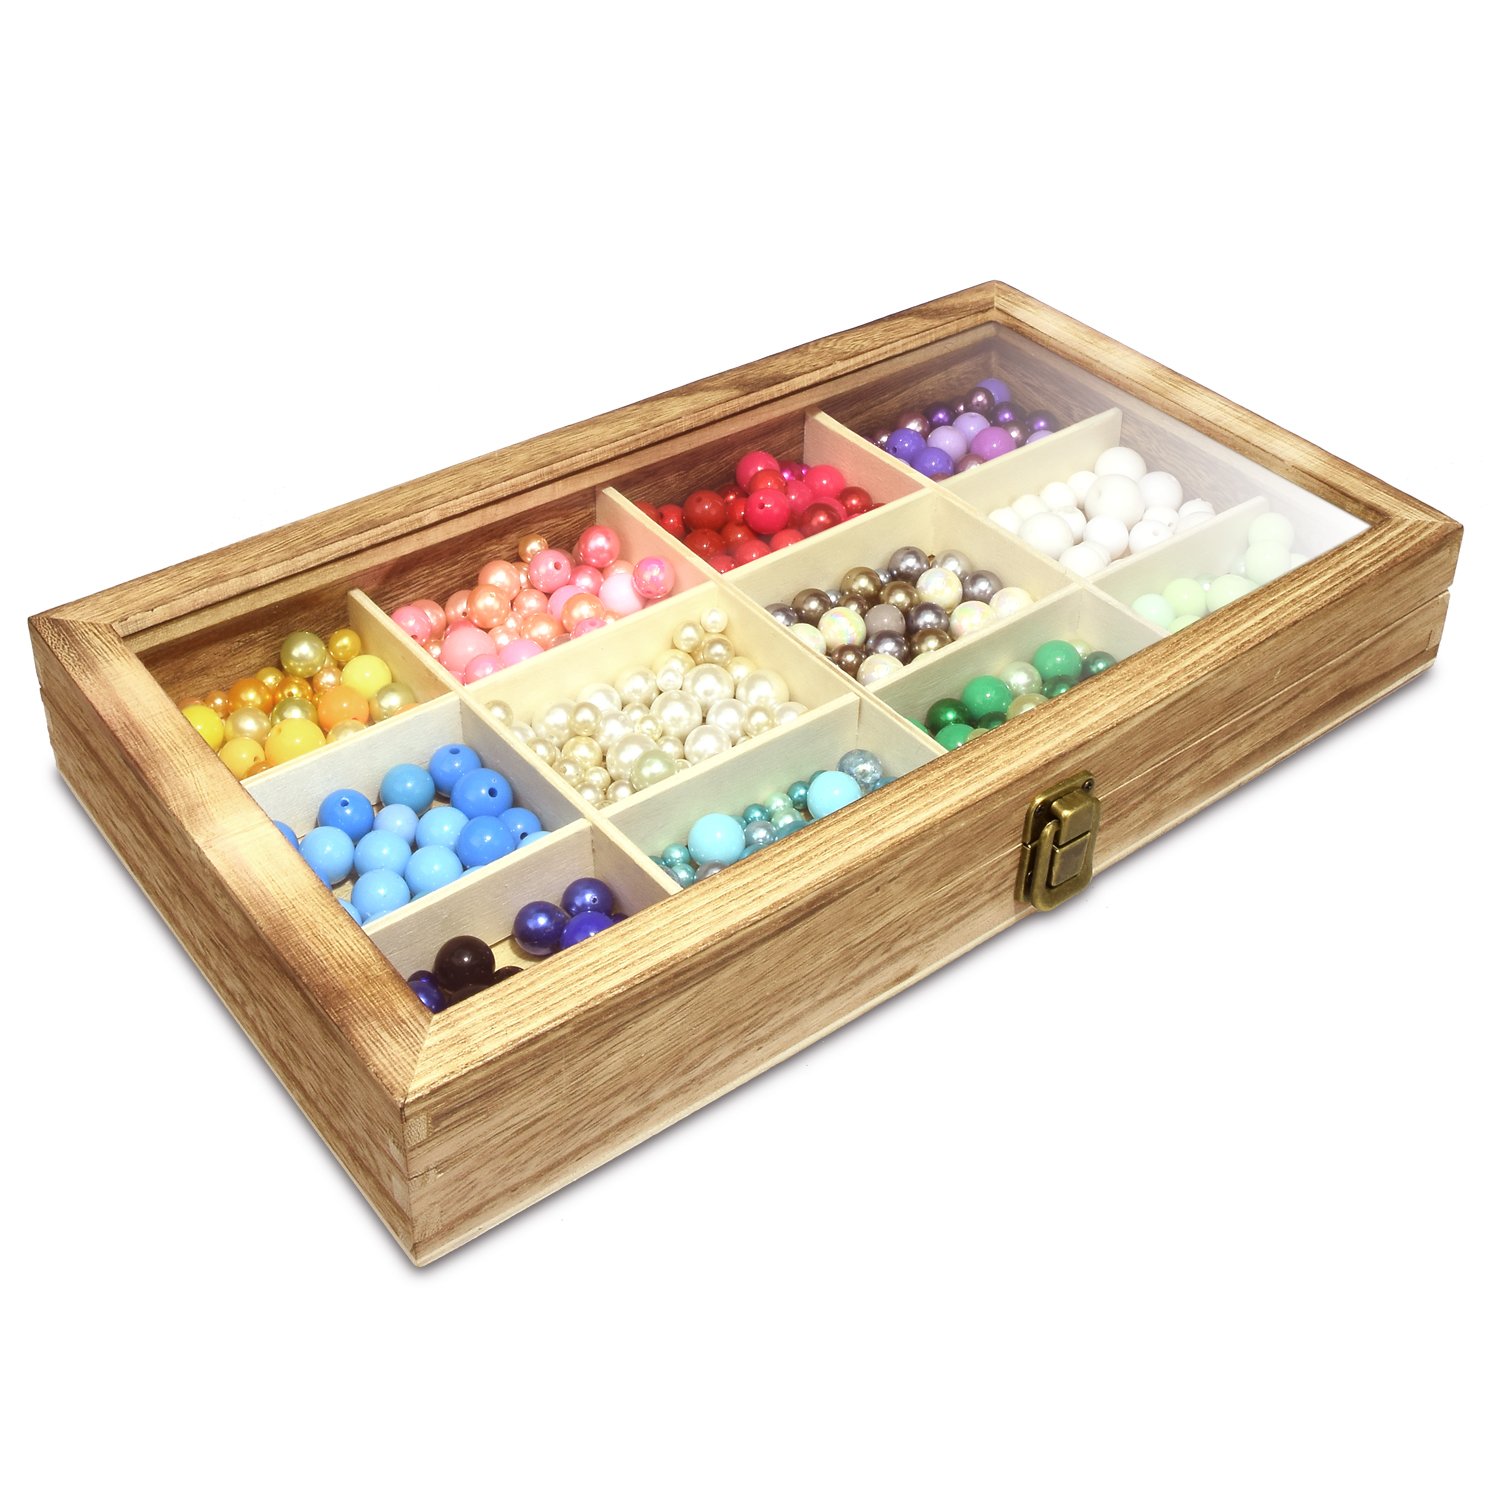 Ikee Design Elegant Wooden Jewelry Storage Tray Box with Glass Lid,12 Compartments Jewelry Tray Organizer, Ideal for Rings,Bracelets,Gems Stone and Small Accessories, Oak Color